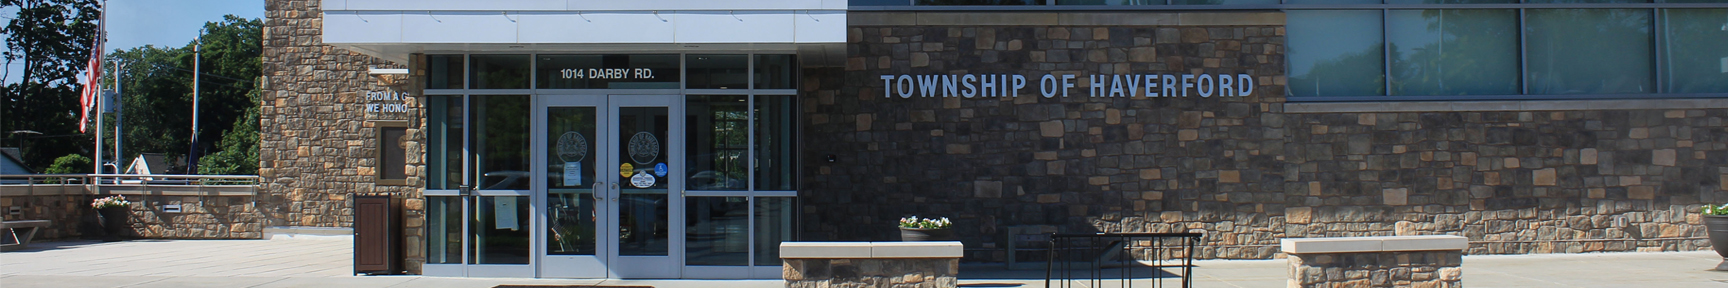 Haverford Township Front